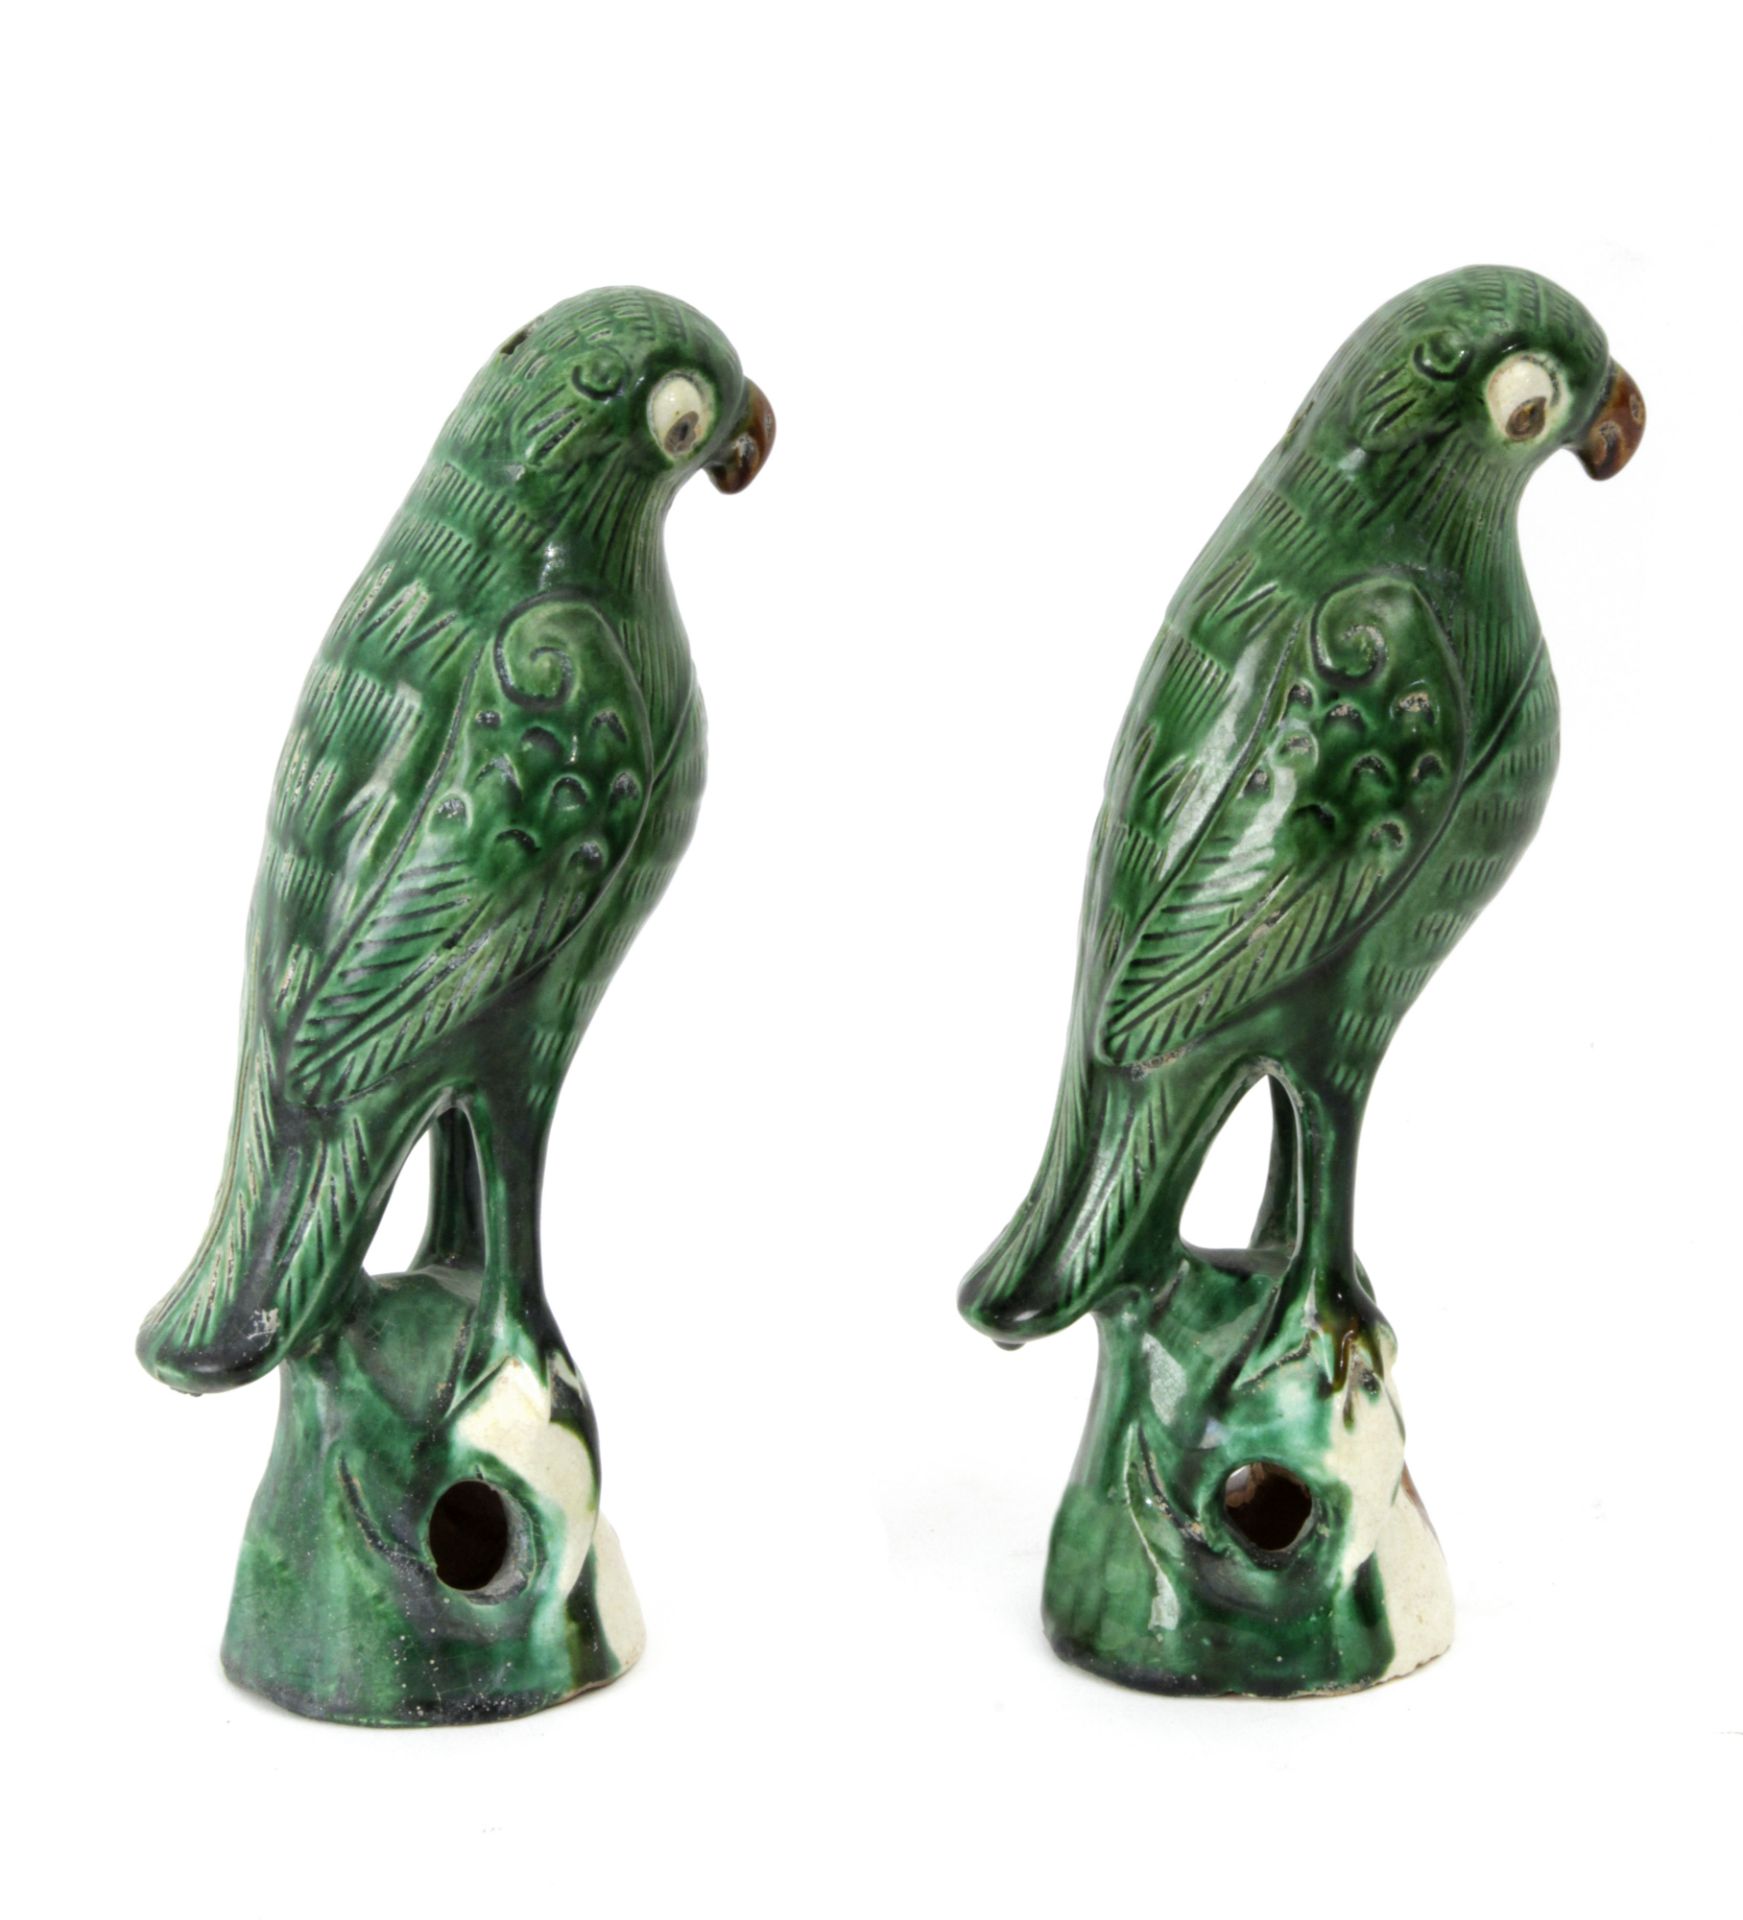 A pair of first half of 20th century Chinese figure of birds in polychrome porcelain - Image 4 of 4